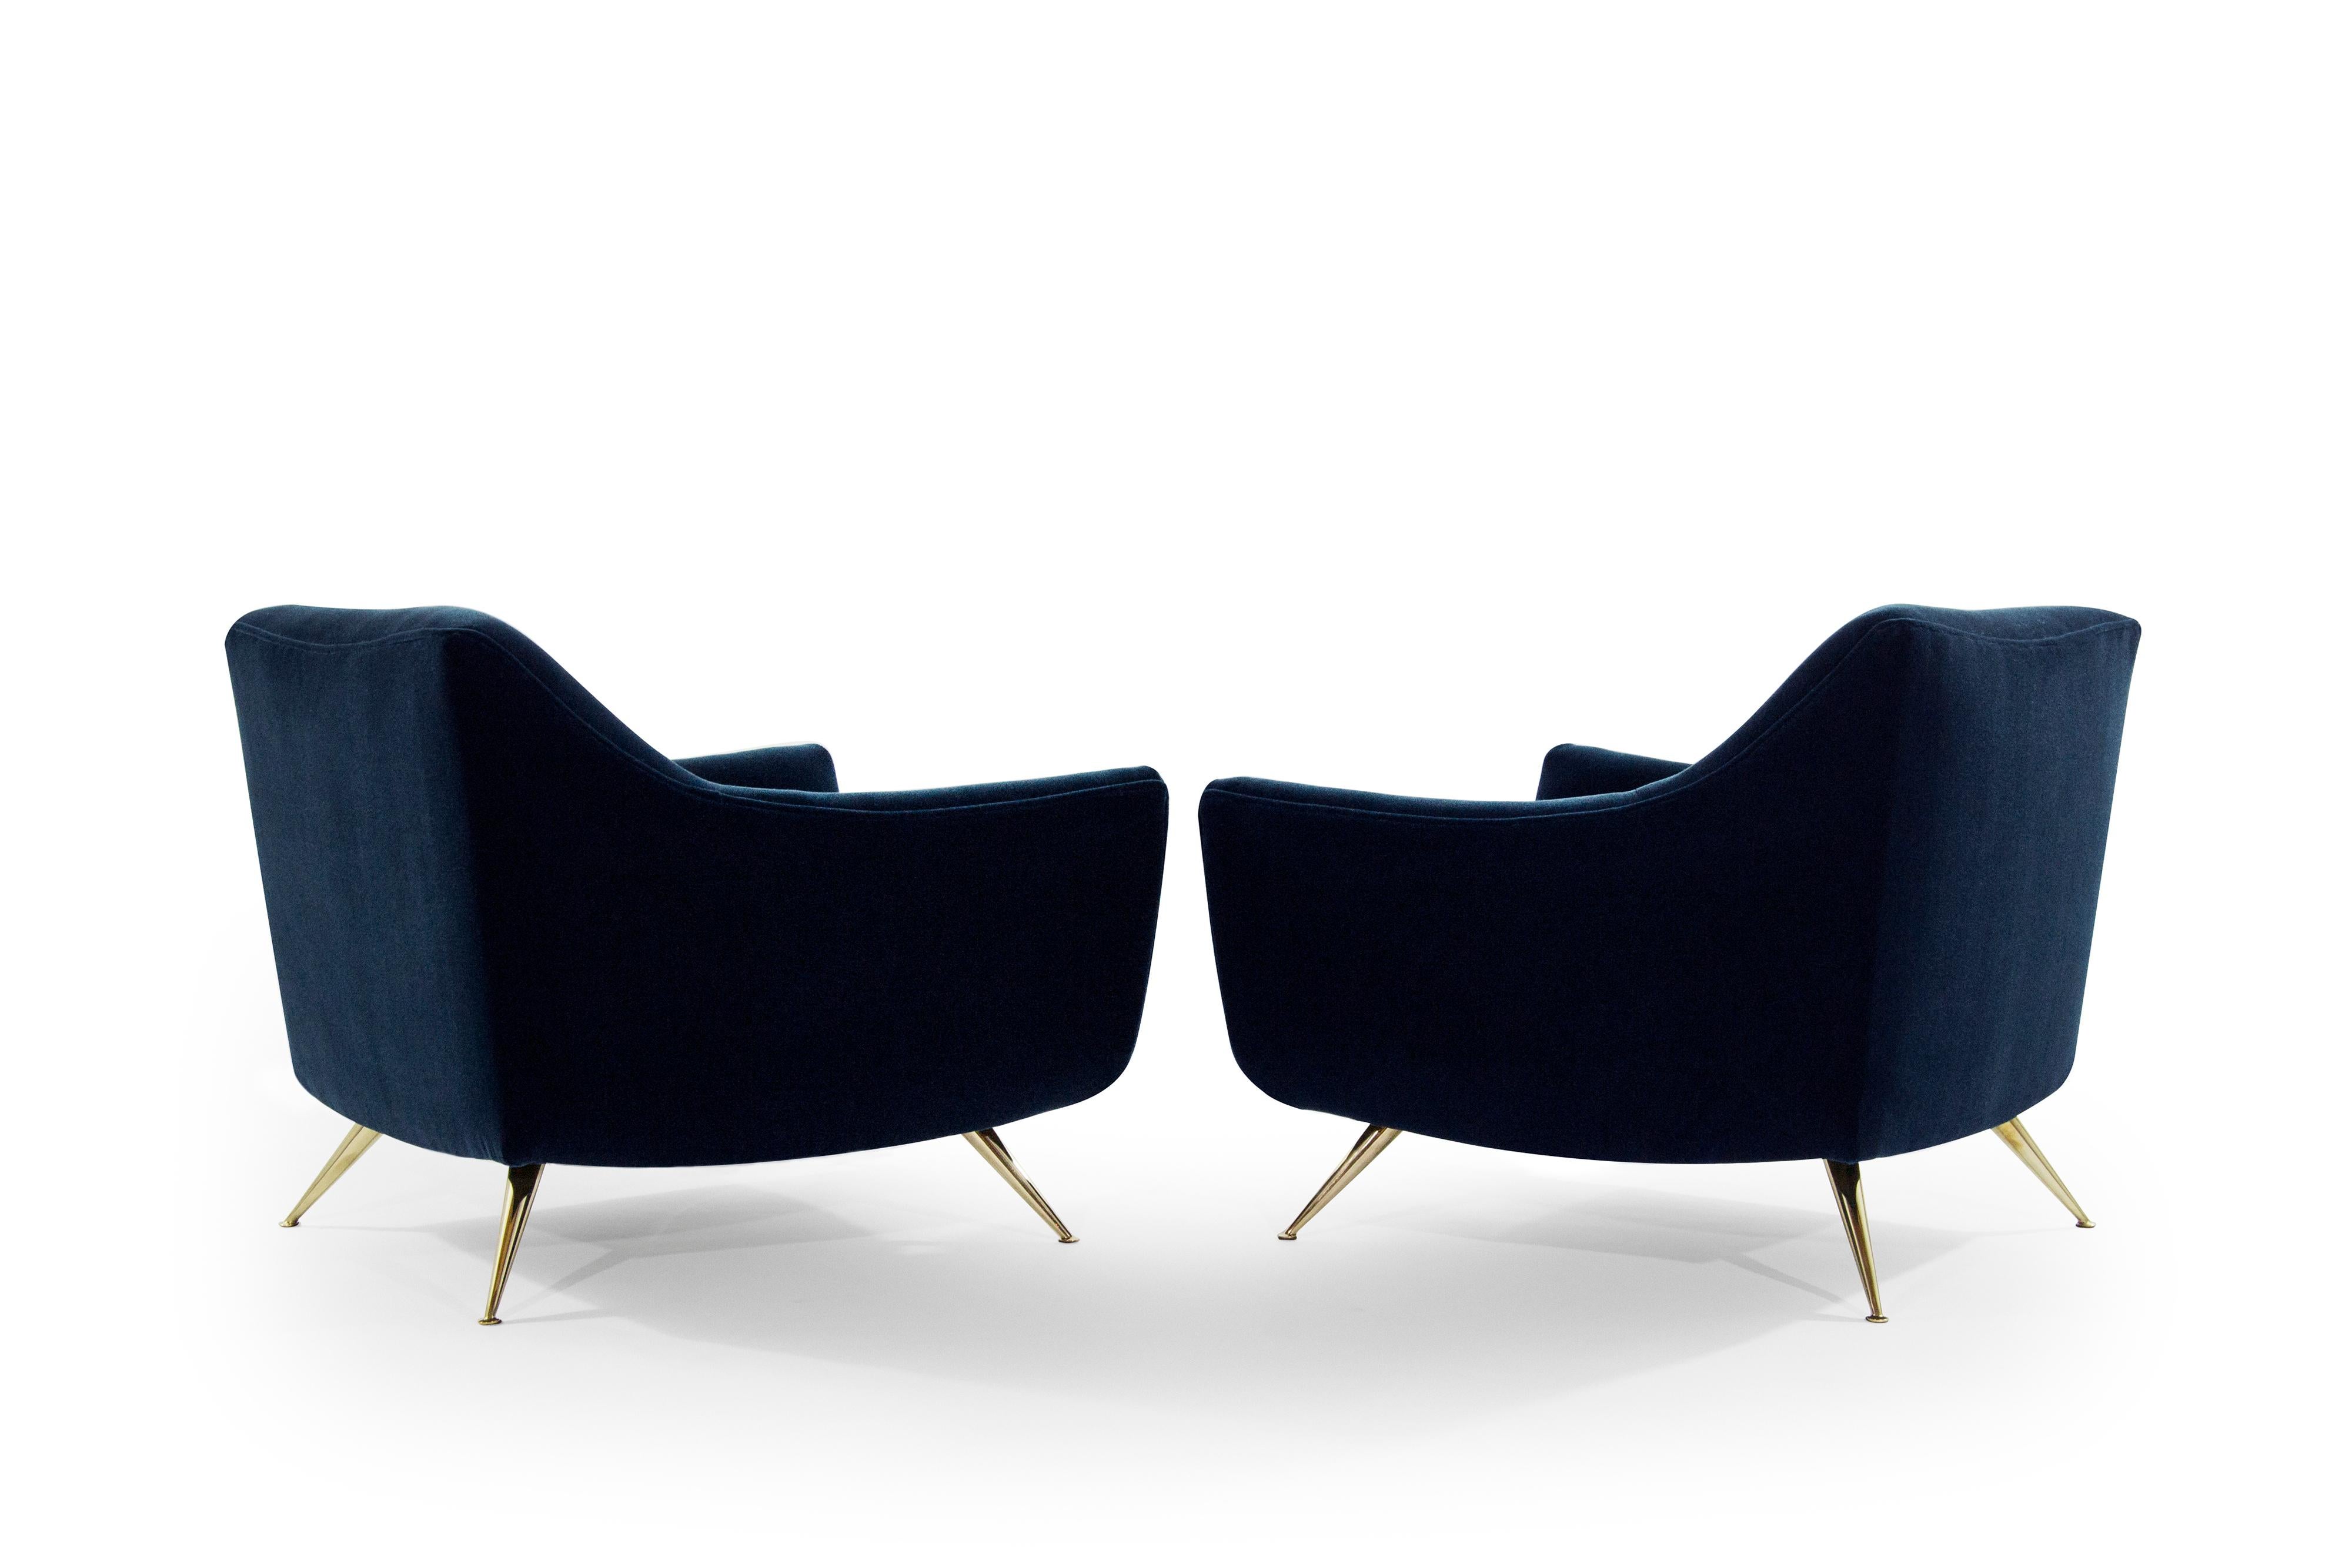 American Mid-Century Modern Henry Glass Lounge Chairs in Navy Mohair